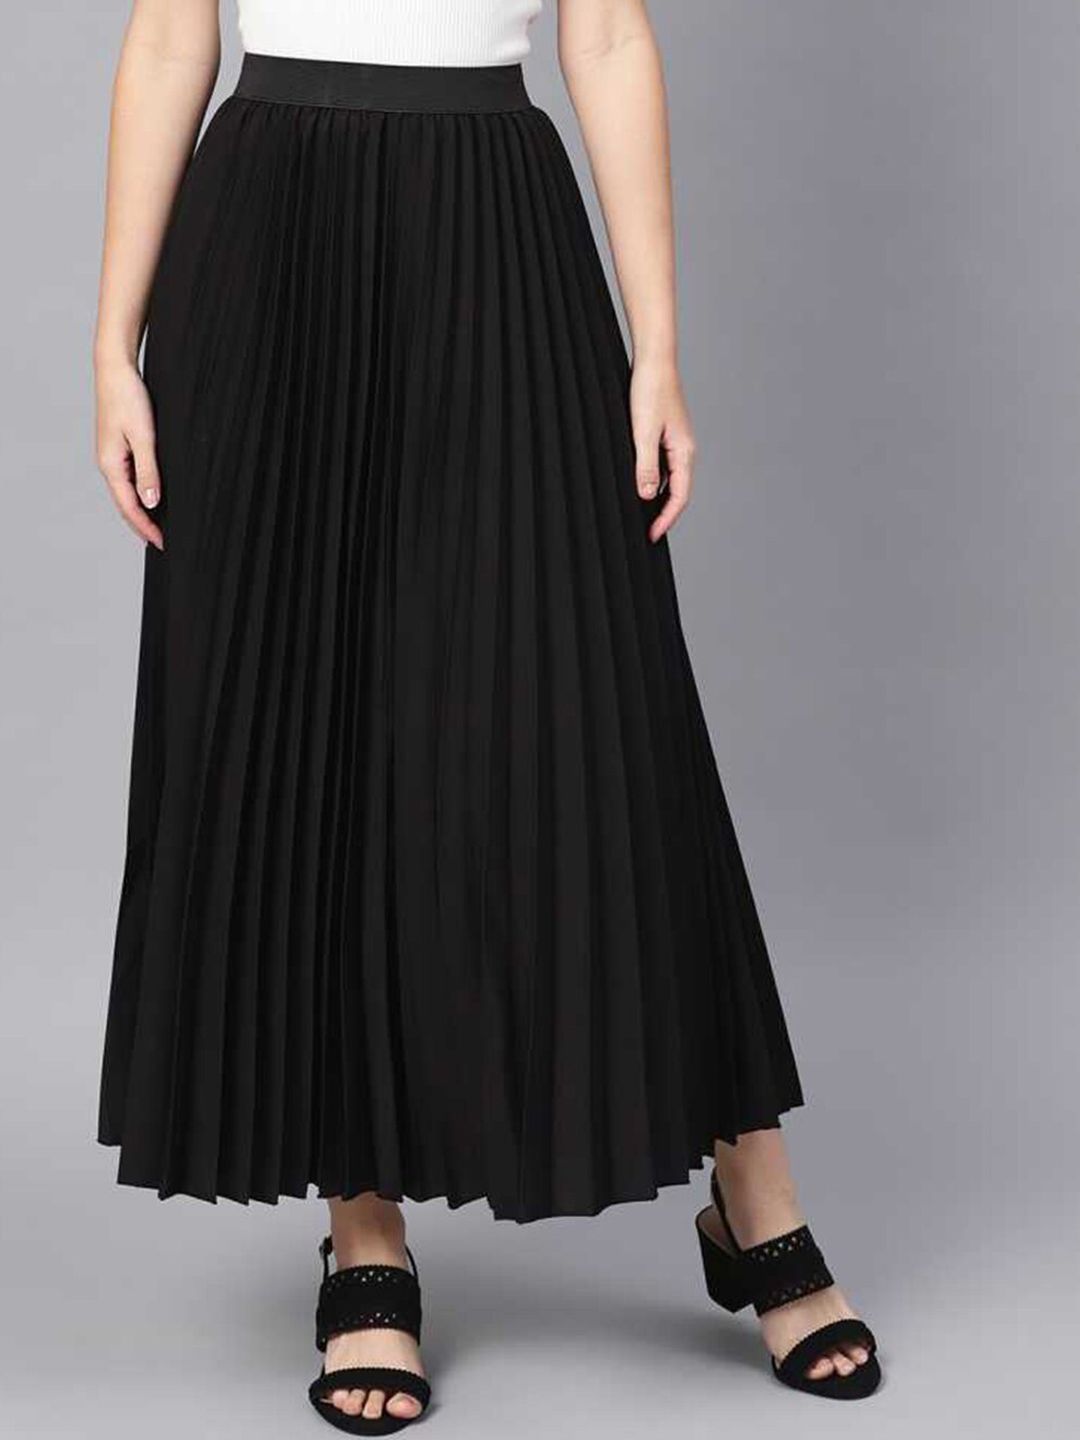 DEKLOOK Accordion Pleated A-Line Maxi Skirt Price in India